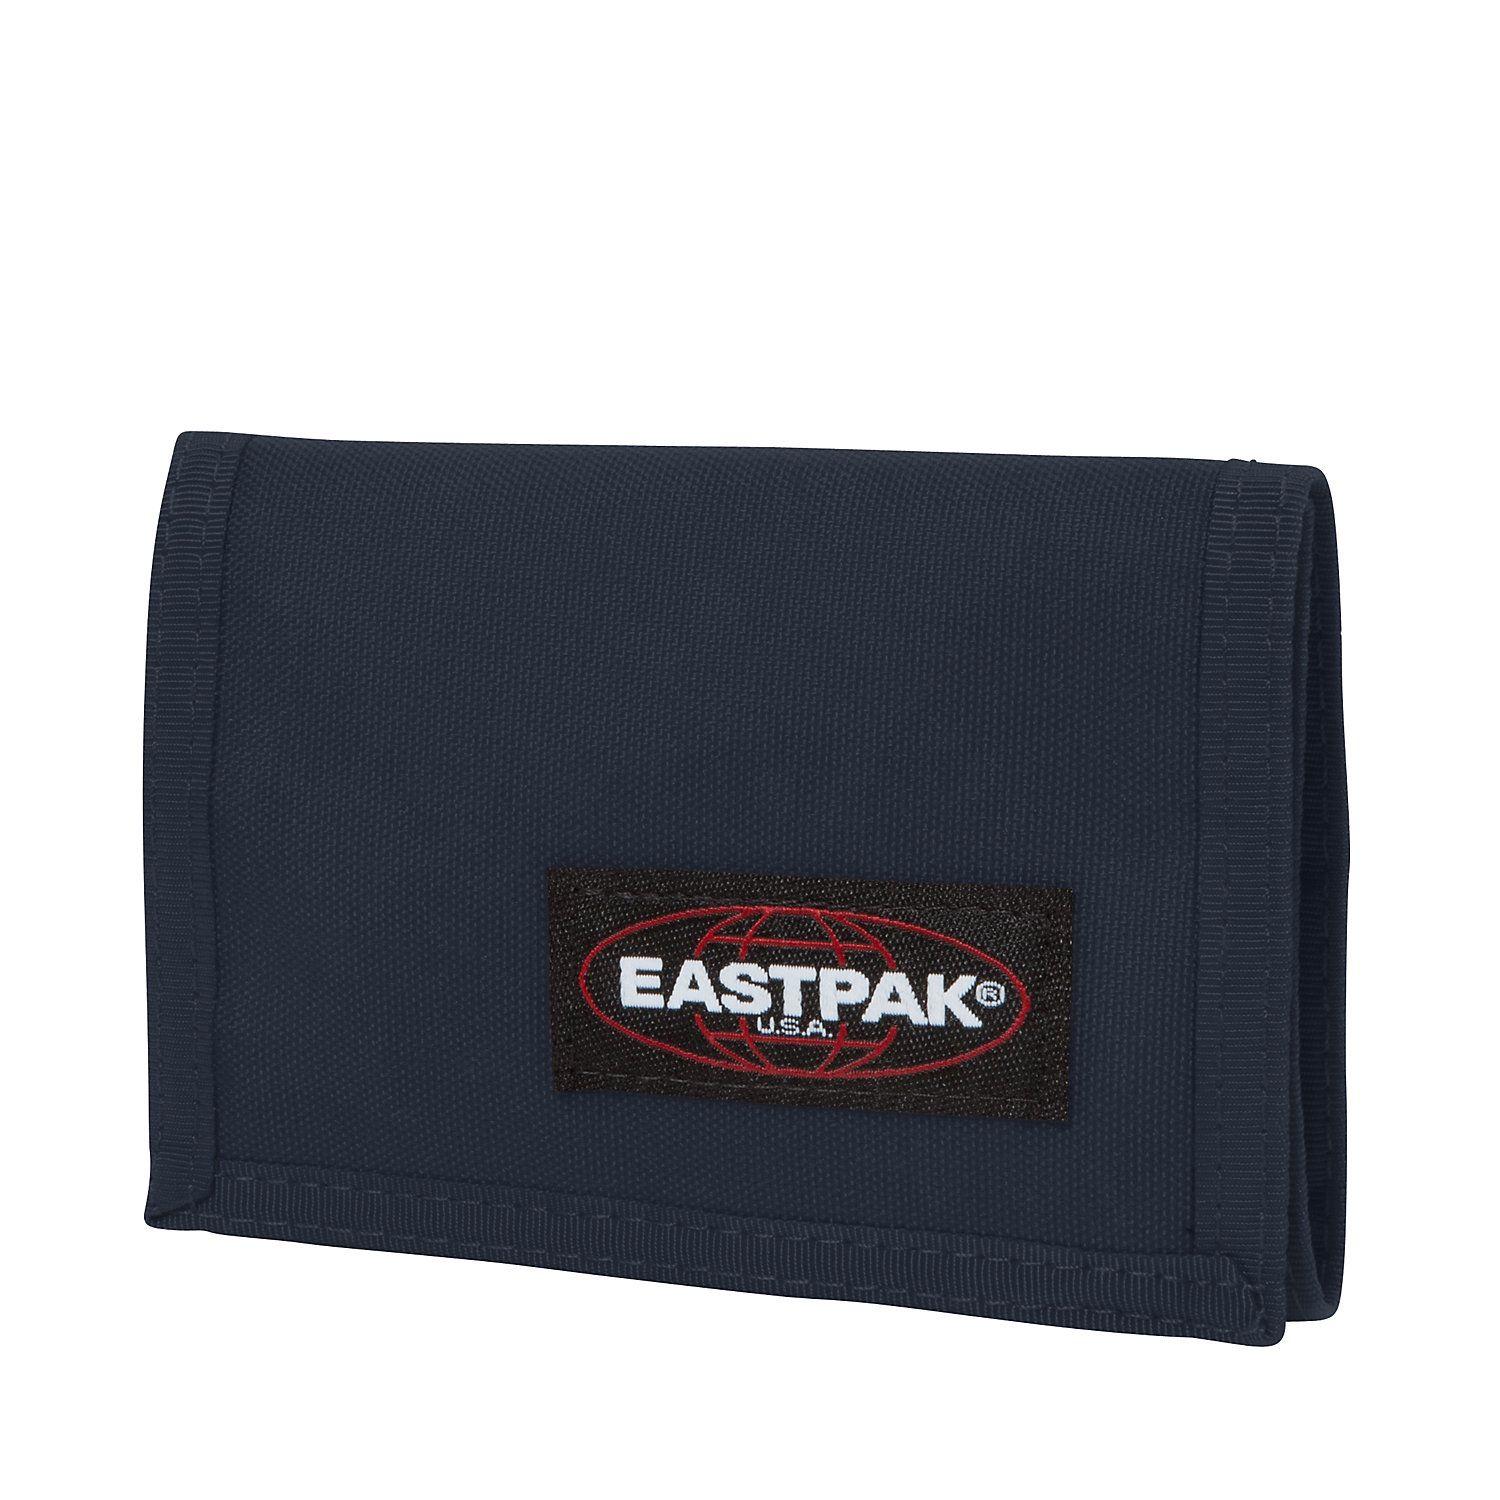 Eastpak Logo - Wallet Crew 3cc Authentic from Eastpak | Koffer24